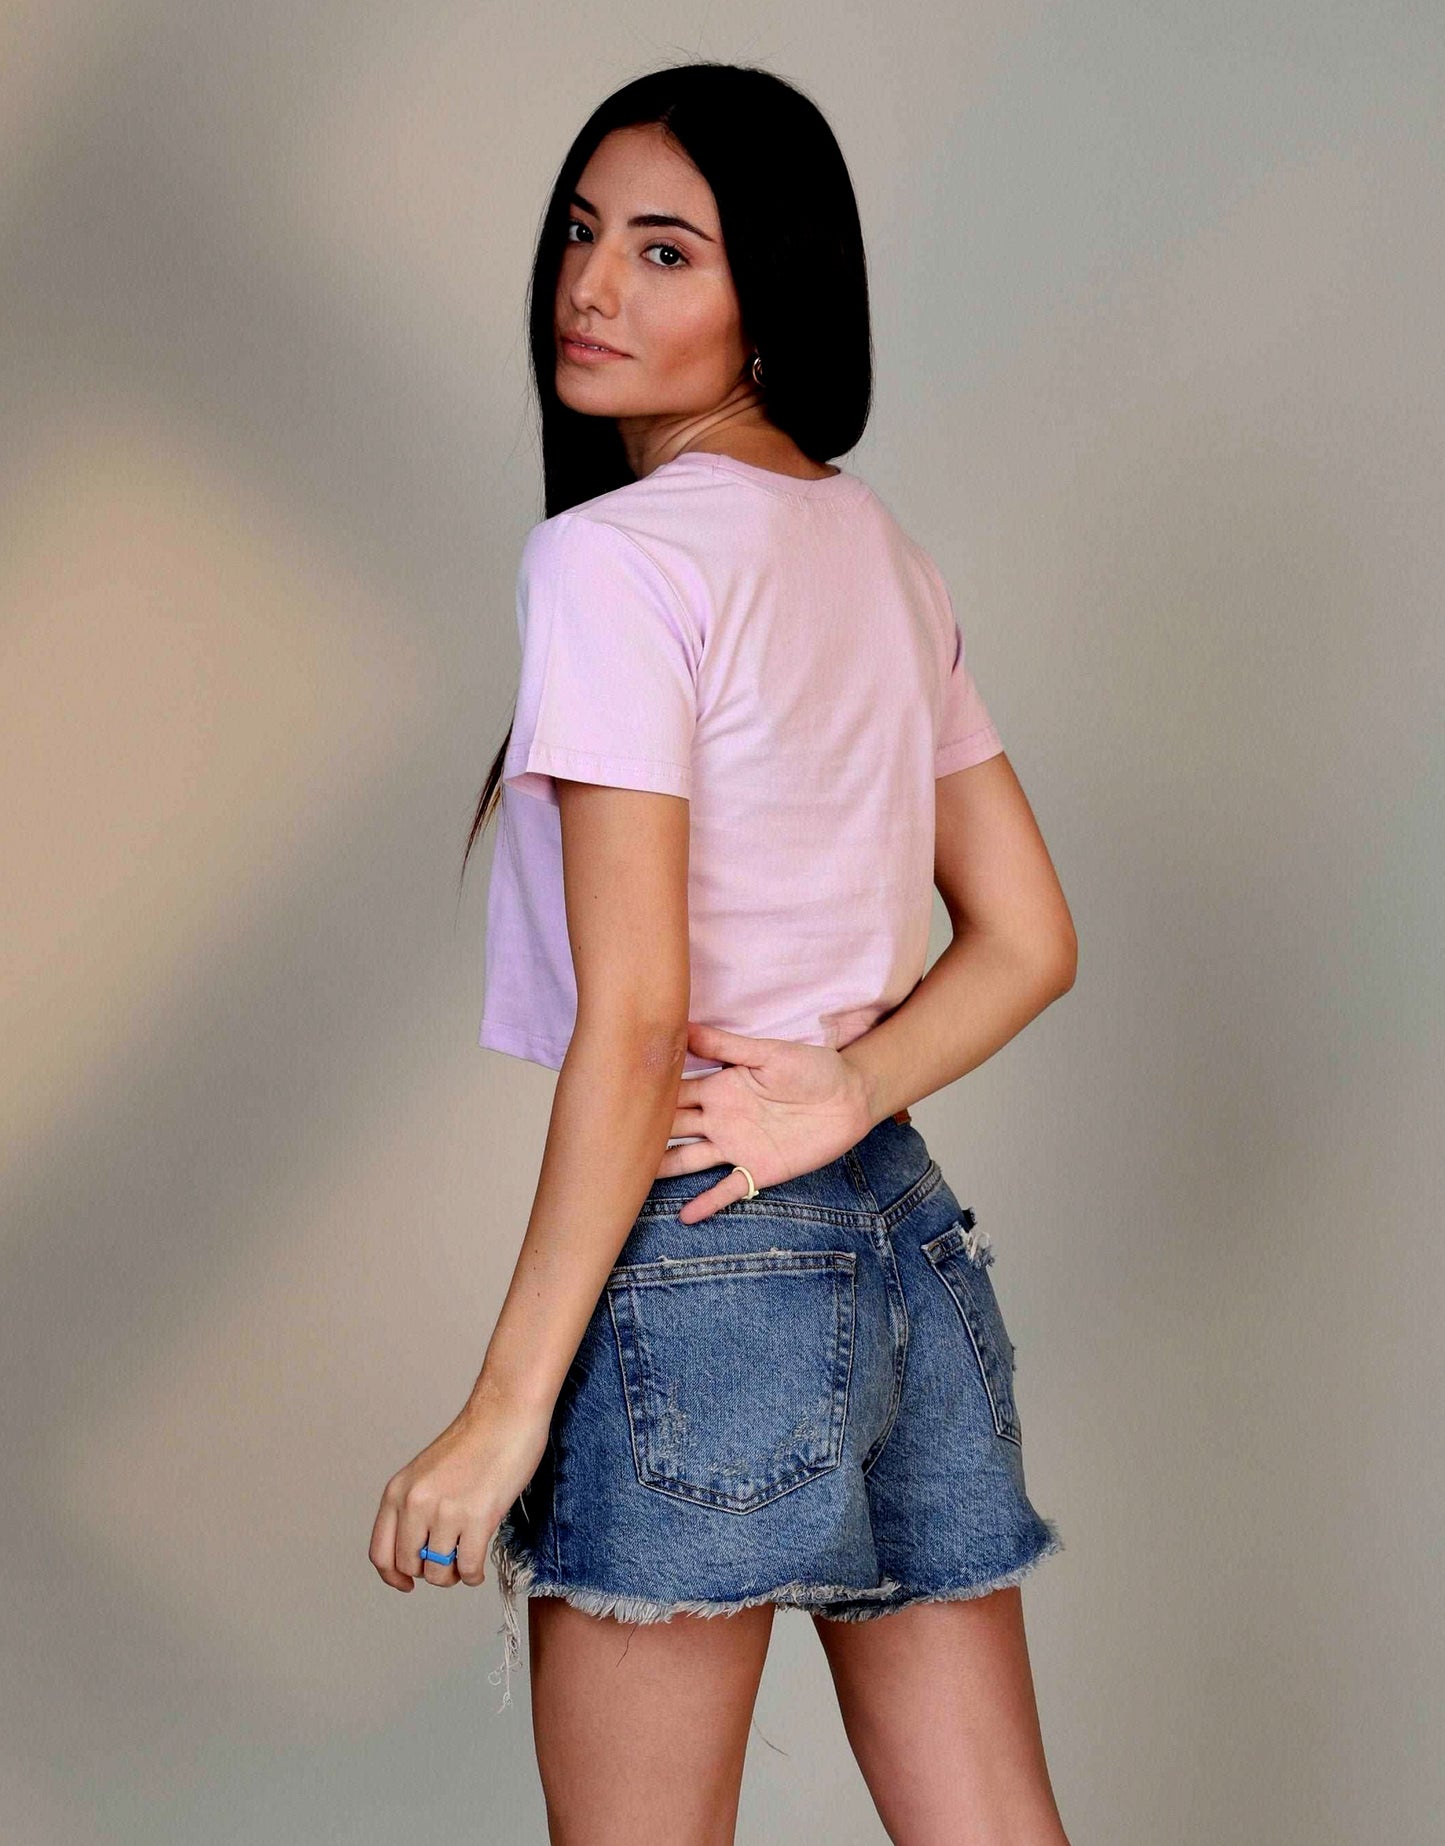 Lavender color - Stylish Short sleeve Crop Top for women